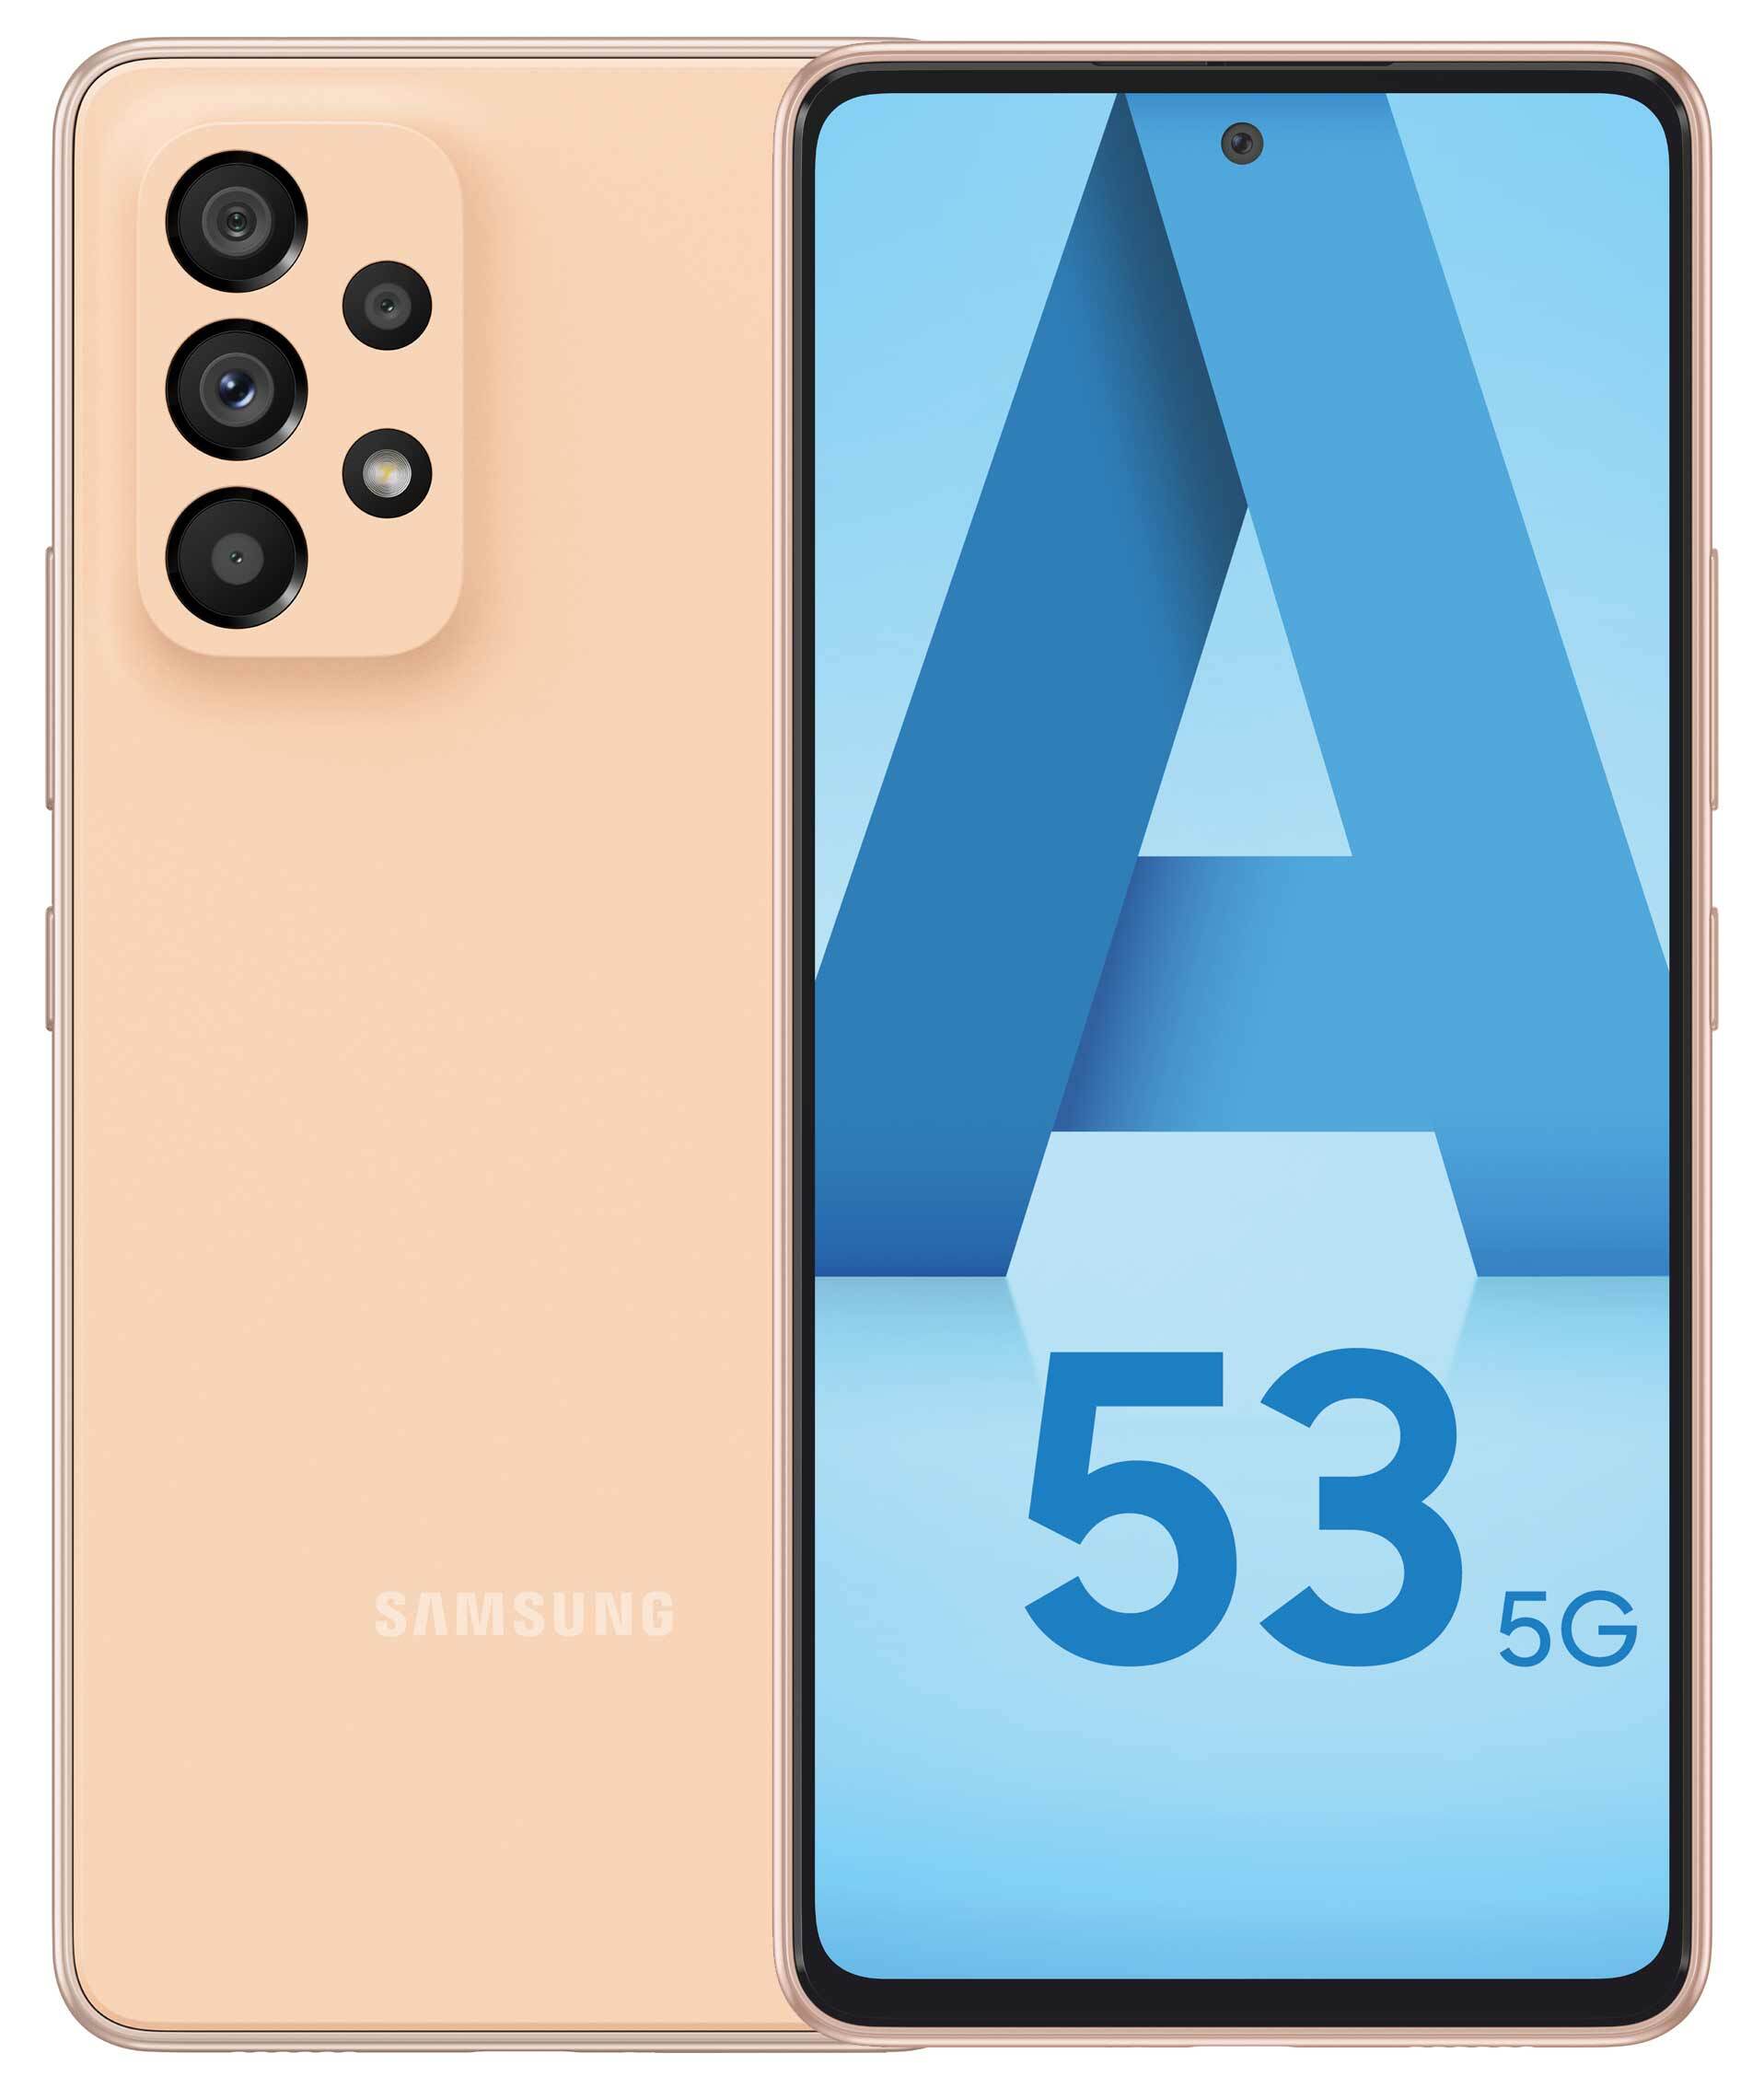 Samsung Galaxy A53 5G's high-res renders leaked ahead of March 17 launch -  Gizmochina